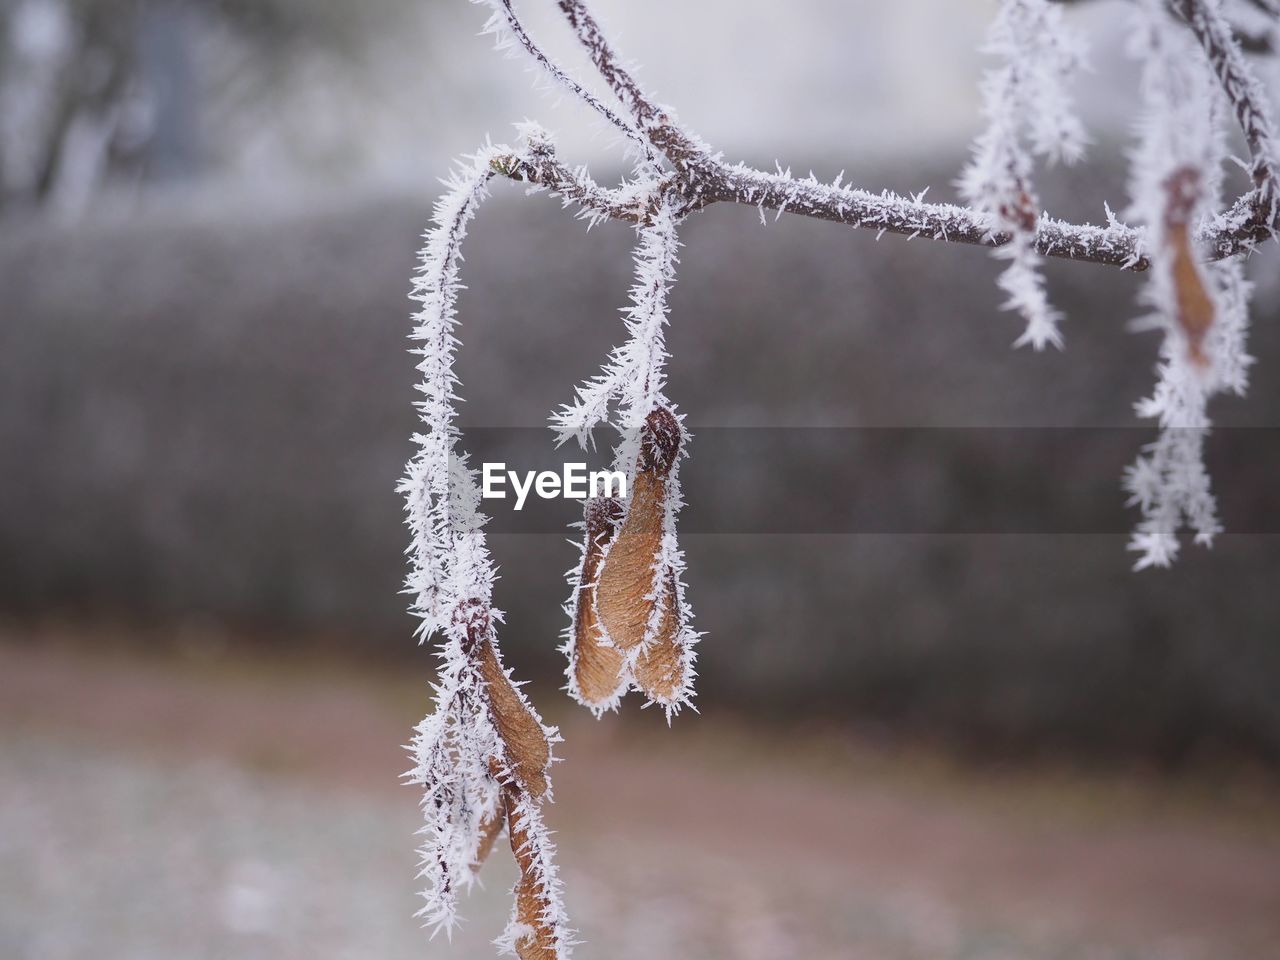 frost, winter, snow, cold temperature, branch, freezing, twig, nature, ice, frozen, plant, focus on foreground, no people, tree, close-up, day, leaf, snowflake, macro photography, beauty in nature, outdoors, tranquility, environment, white, land, flower, selective focus, coniferous tree